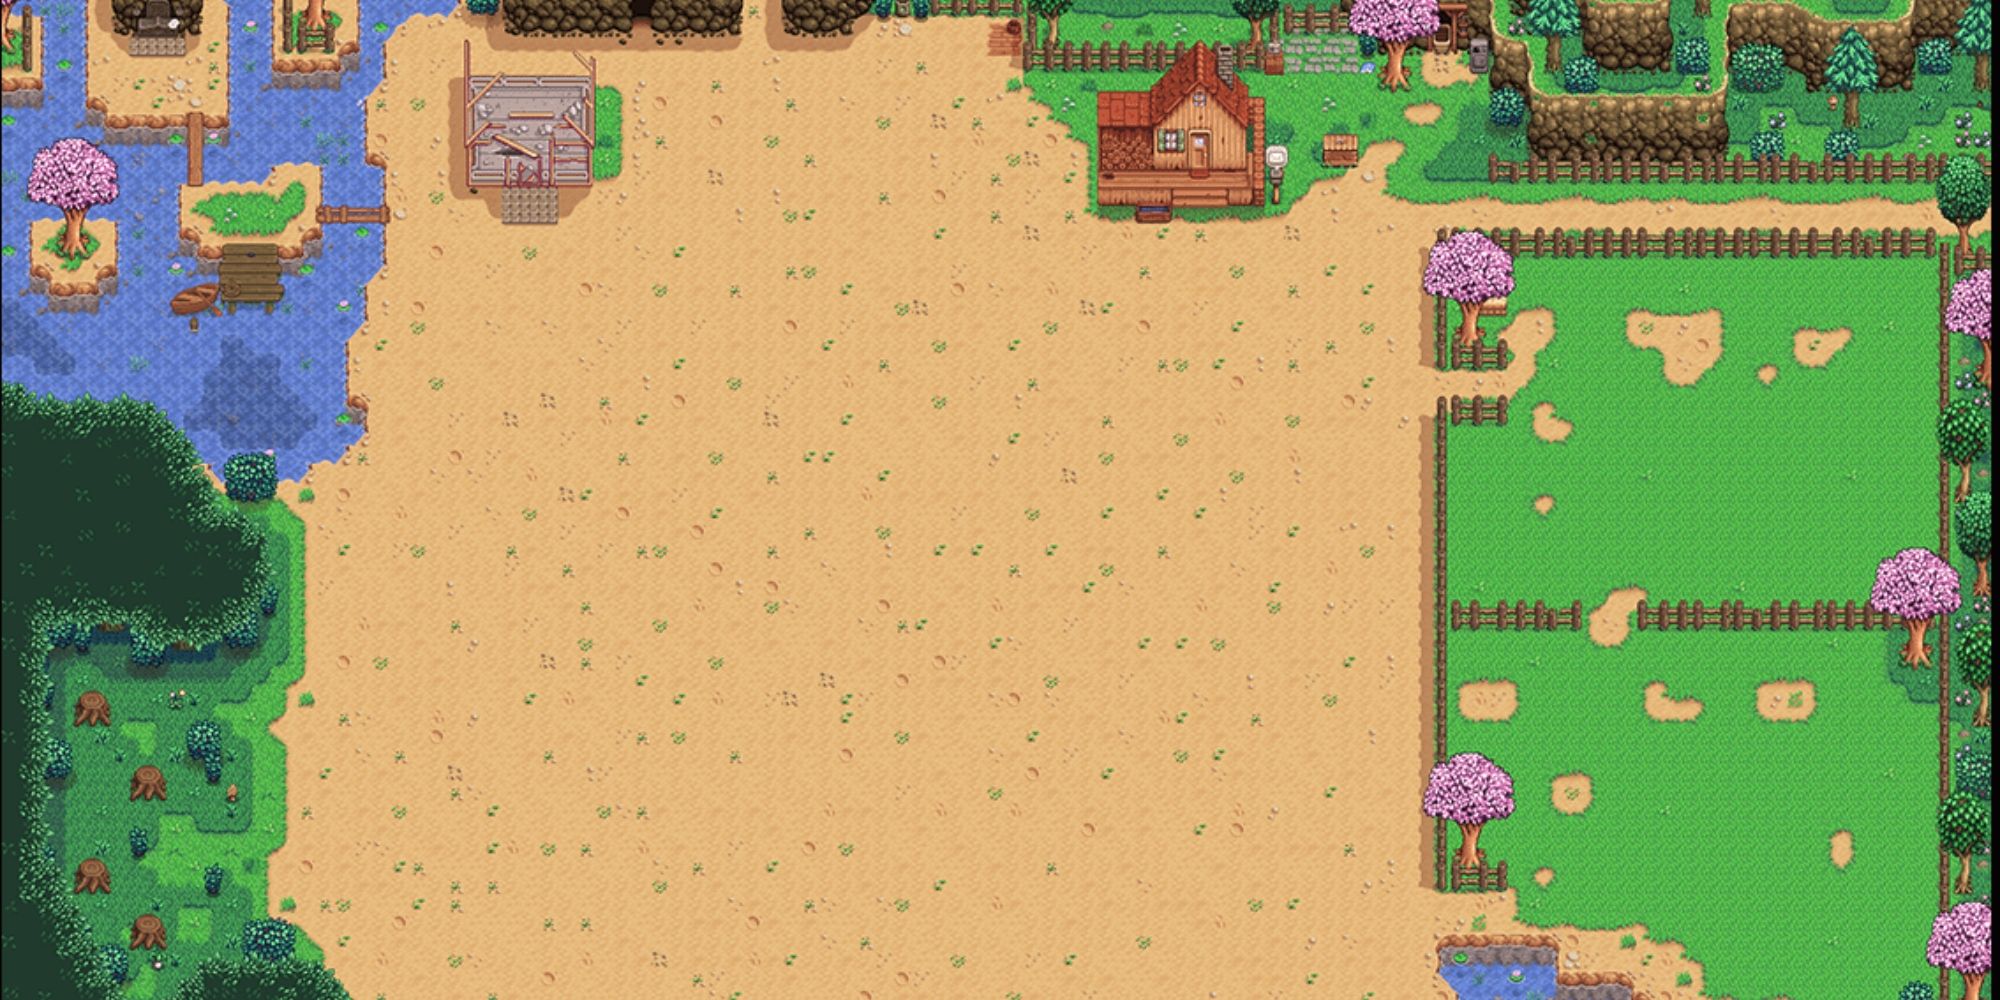 A Stardew Valley Farm map featuring a large plot of land, two animal pens, a lake, and a forest clearing